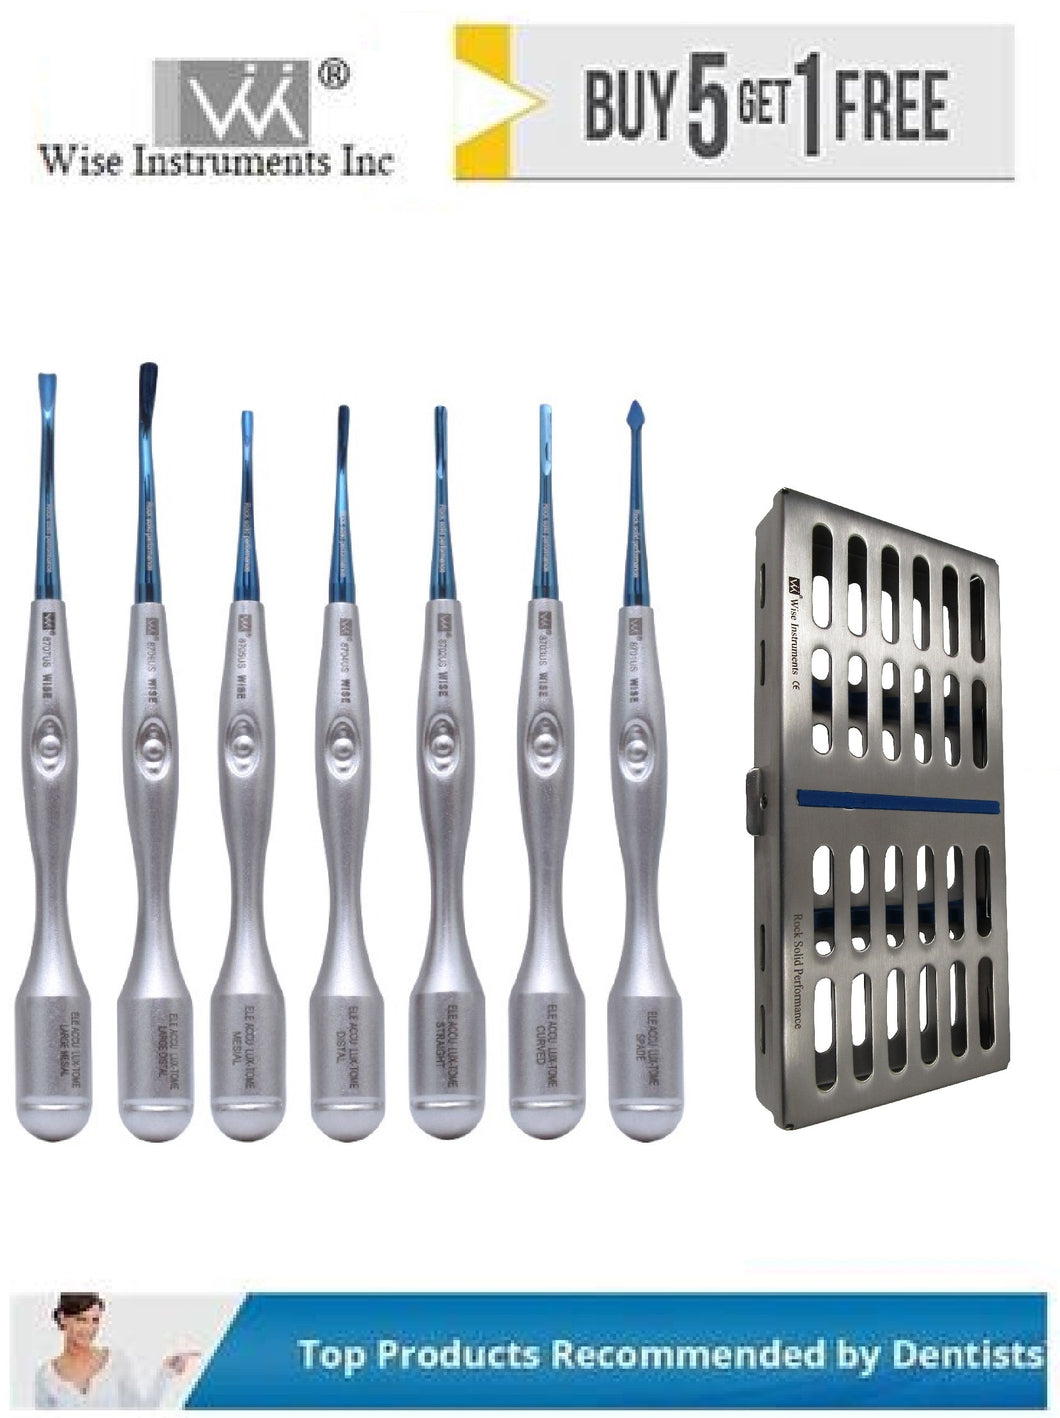 PDL Accu Luxating Set of 7 With Sterilization Cassette